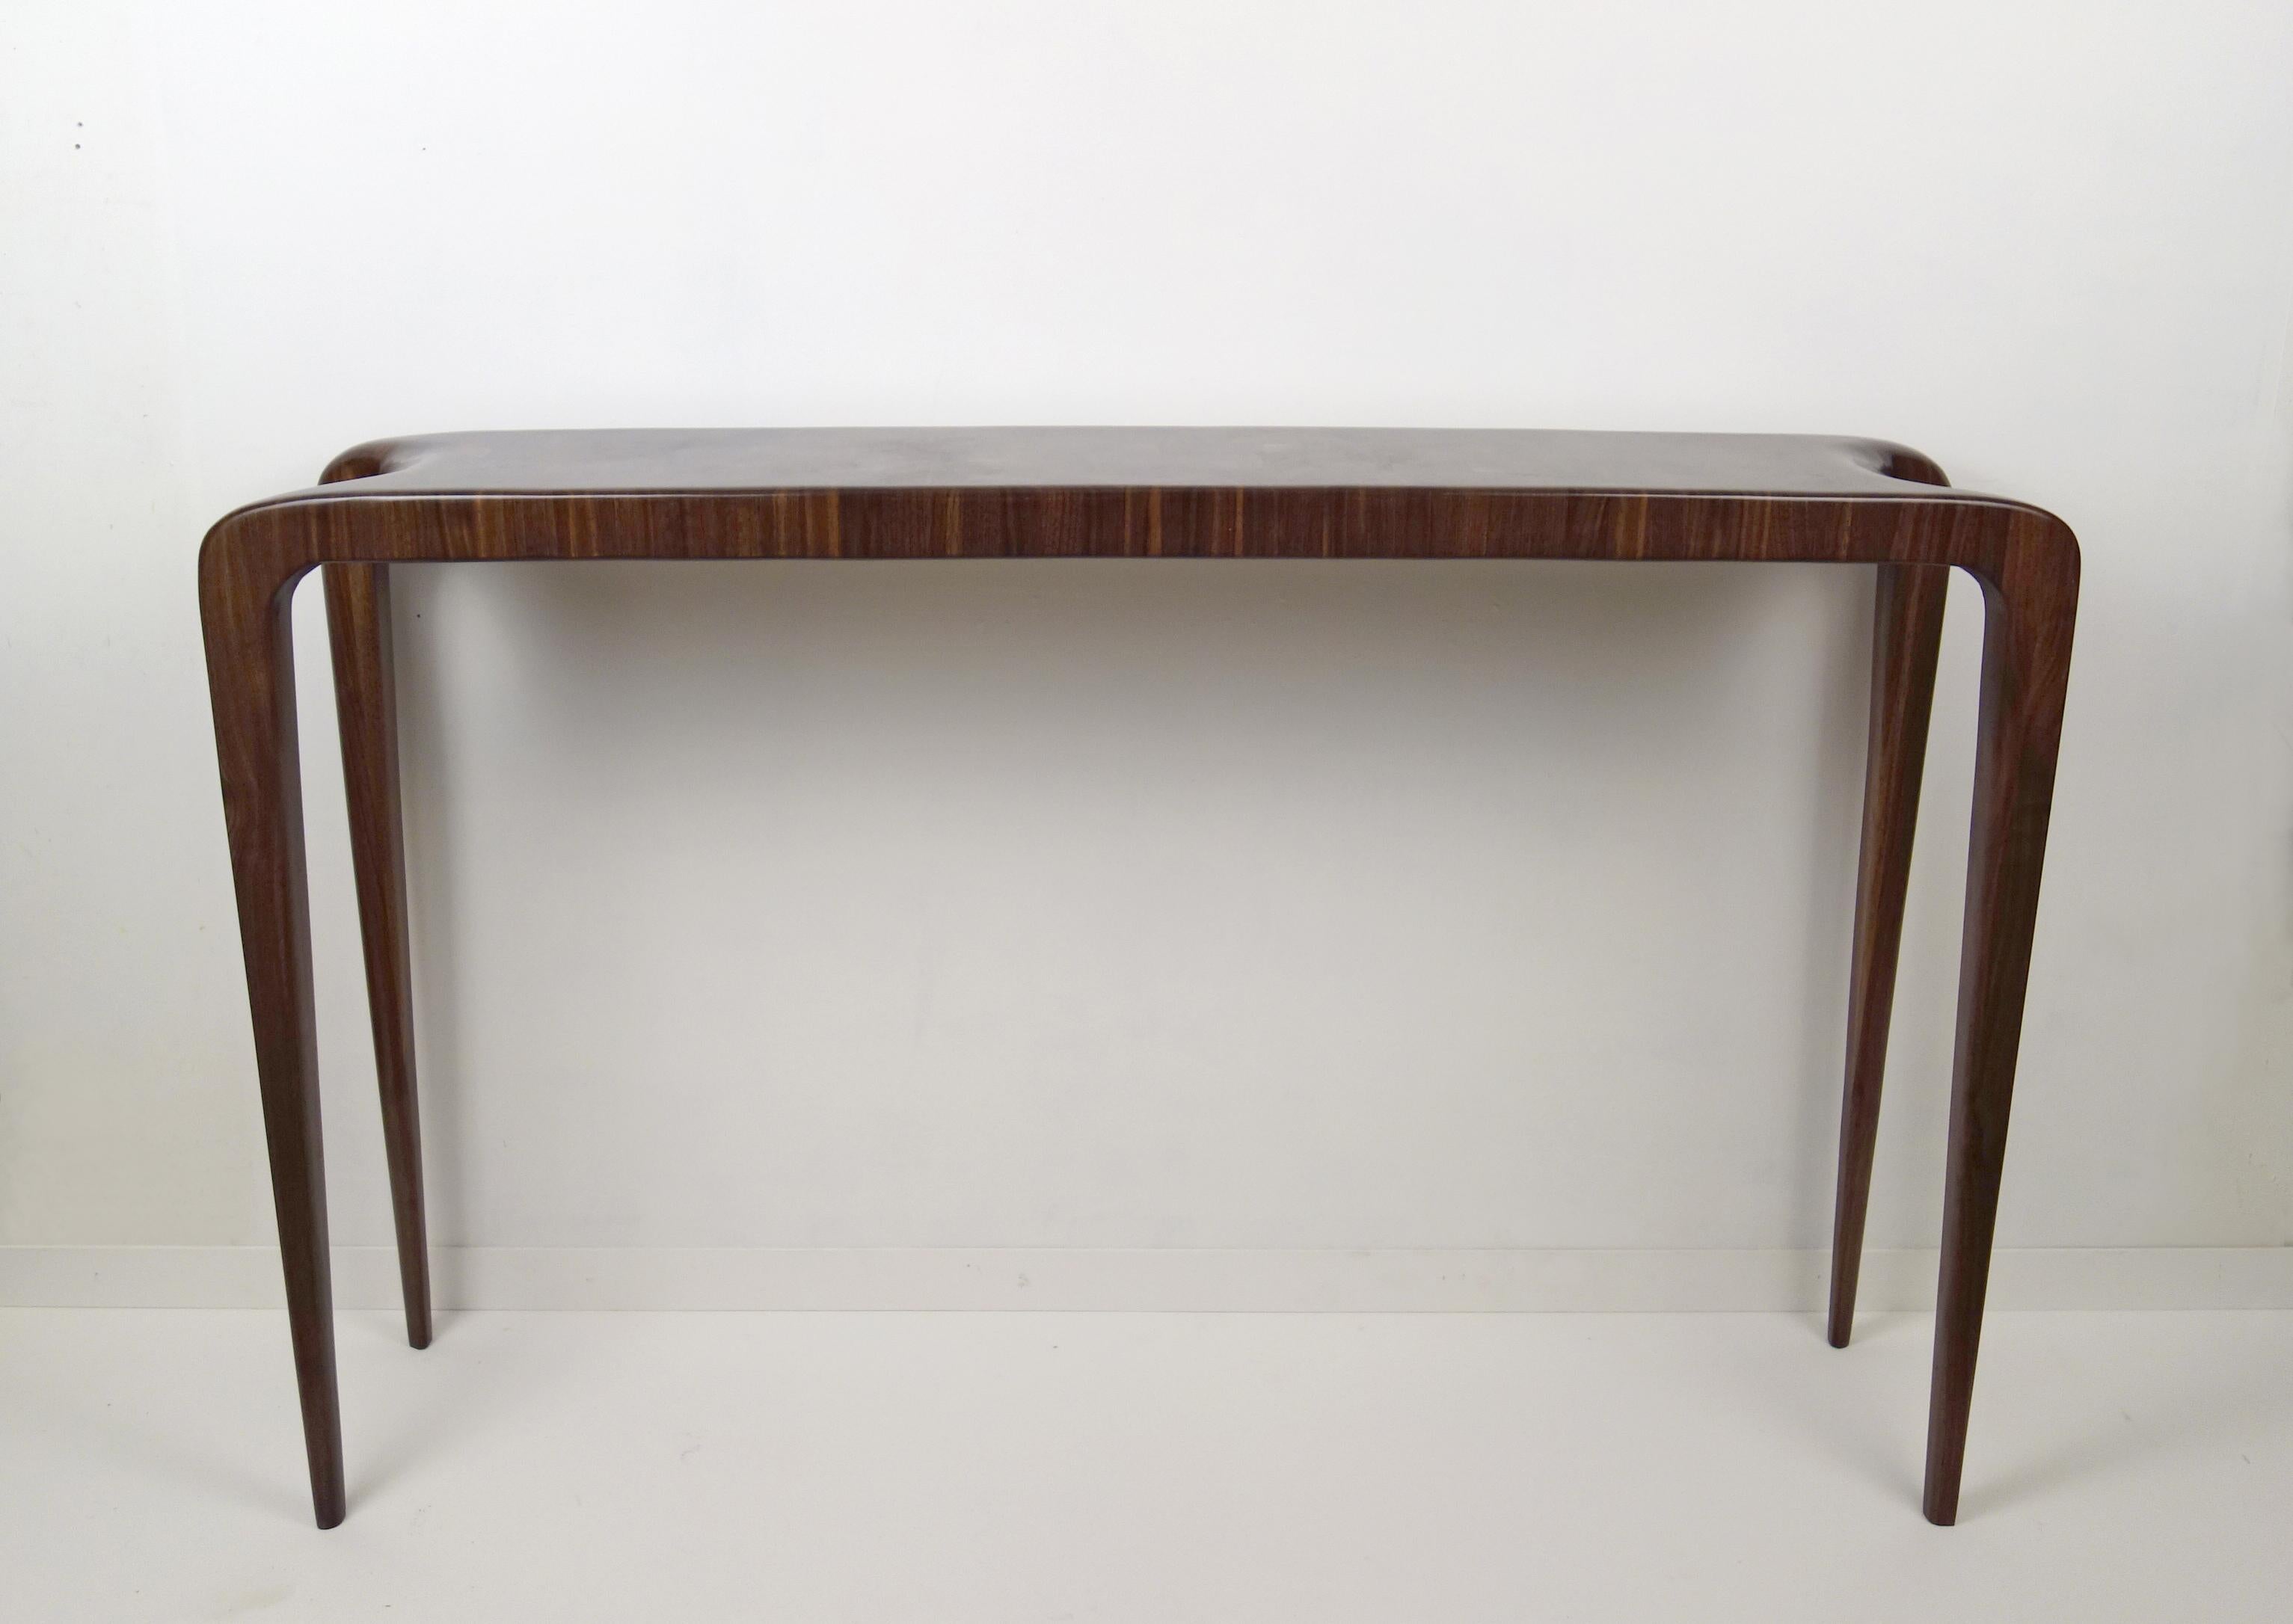 Endgrain Console by Aaron Scott
Dimensions: D 28 x W 127 x H 81.5 cm
Materials: Walnut.


Brooklyn-based designer Aaron Scott was raised in the mountains and forests of Southwest Oregon. He studied philosophy at the University of